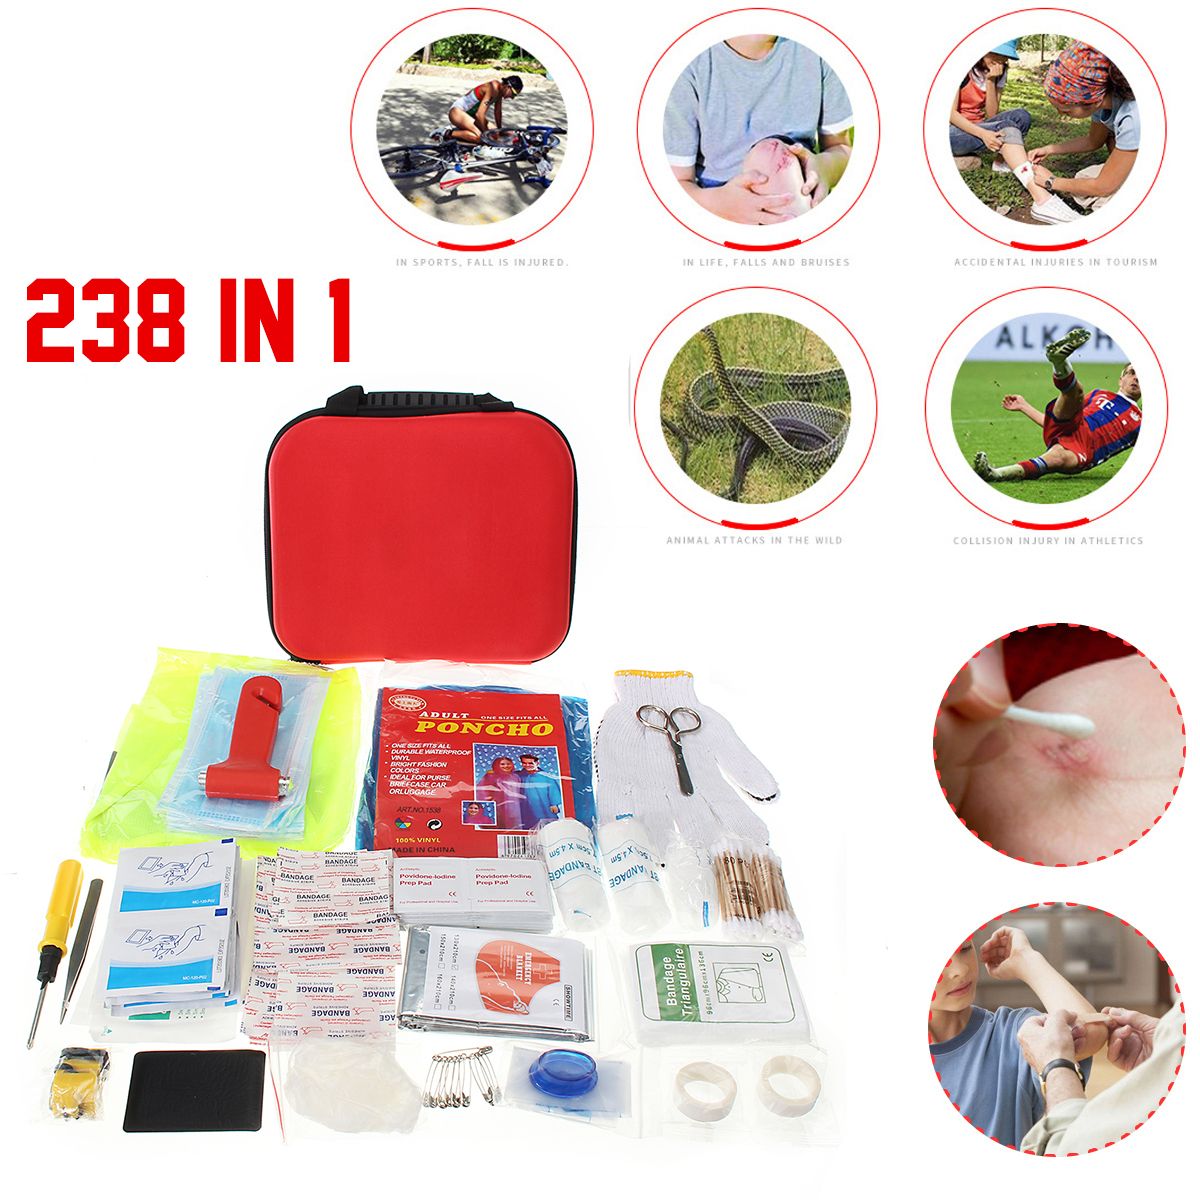 238PCS-Red-First-Aid-Kit-38-Kinds-238-Components-Emergency-Kit-Outdoor-Vehicle-Emergency-Kit-EVA-Red-1587169